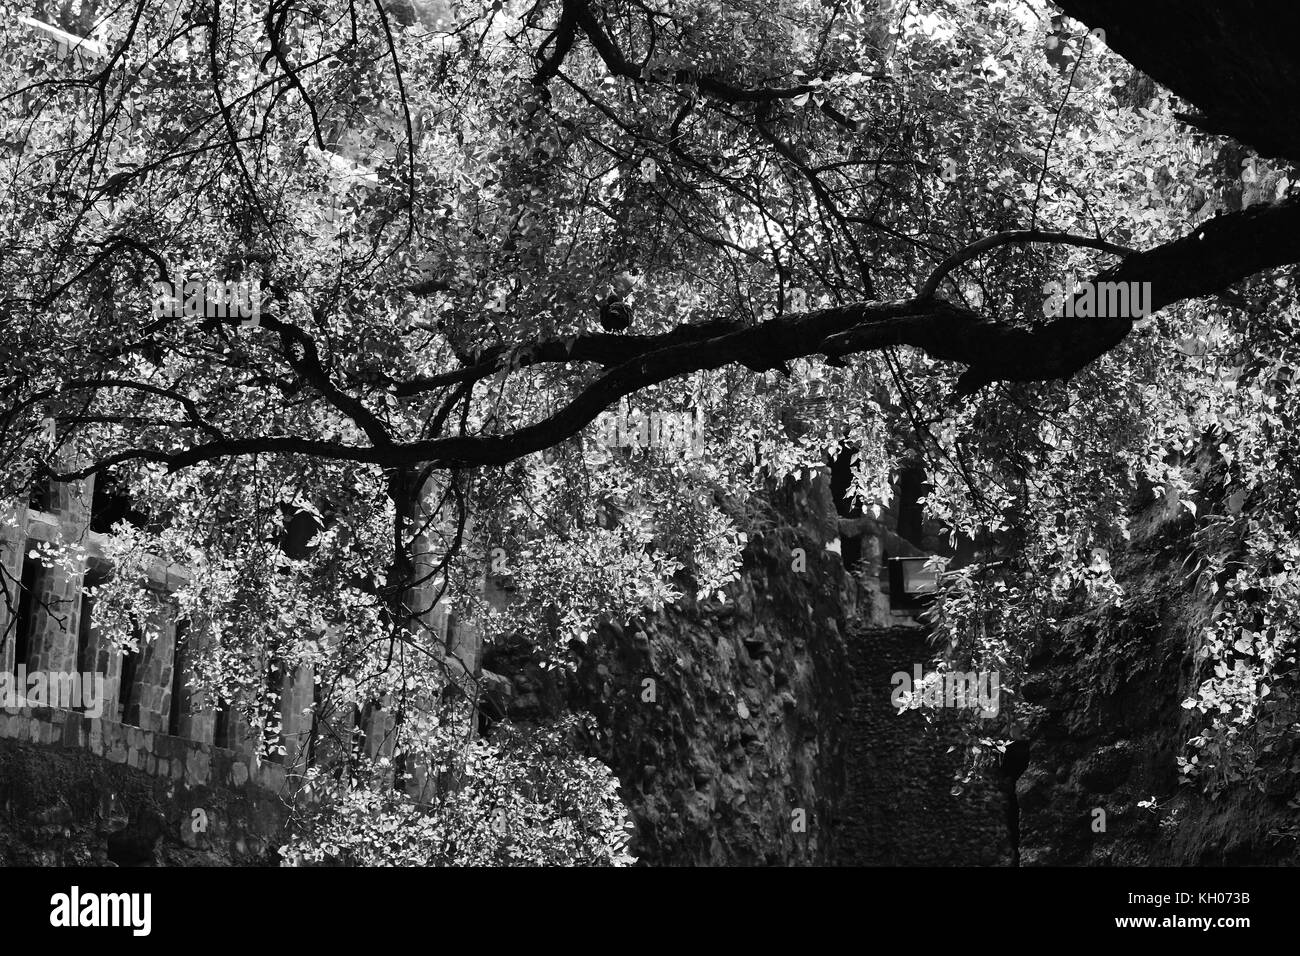 A backlit tree branch in monochrome or tree branch illuminated by sunlight in black and white. Stock Photo